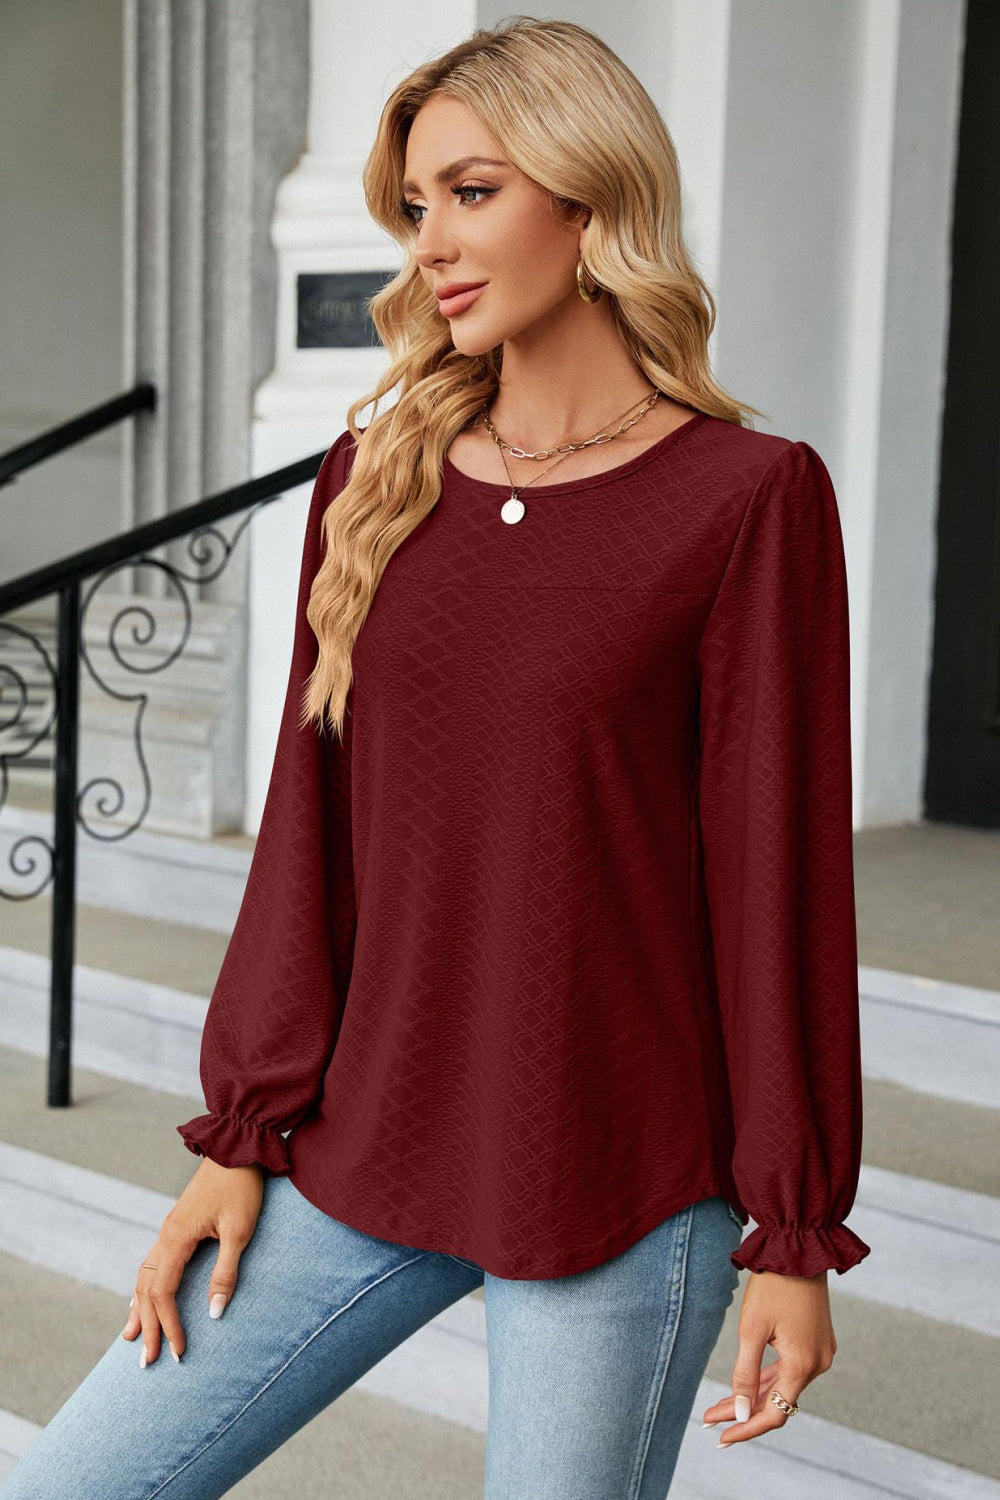 Round Neck Flounce Sleeve Blouse - Women’s Clothing & Accessories - Shirts & Tops - 23 - 2024